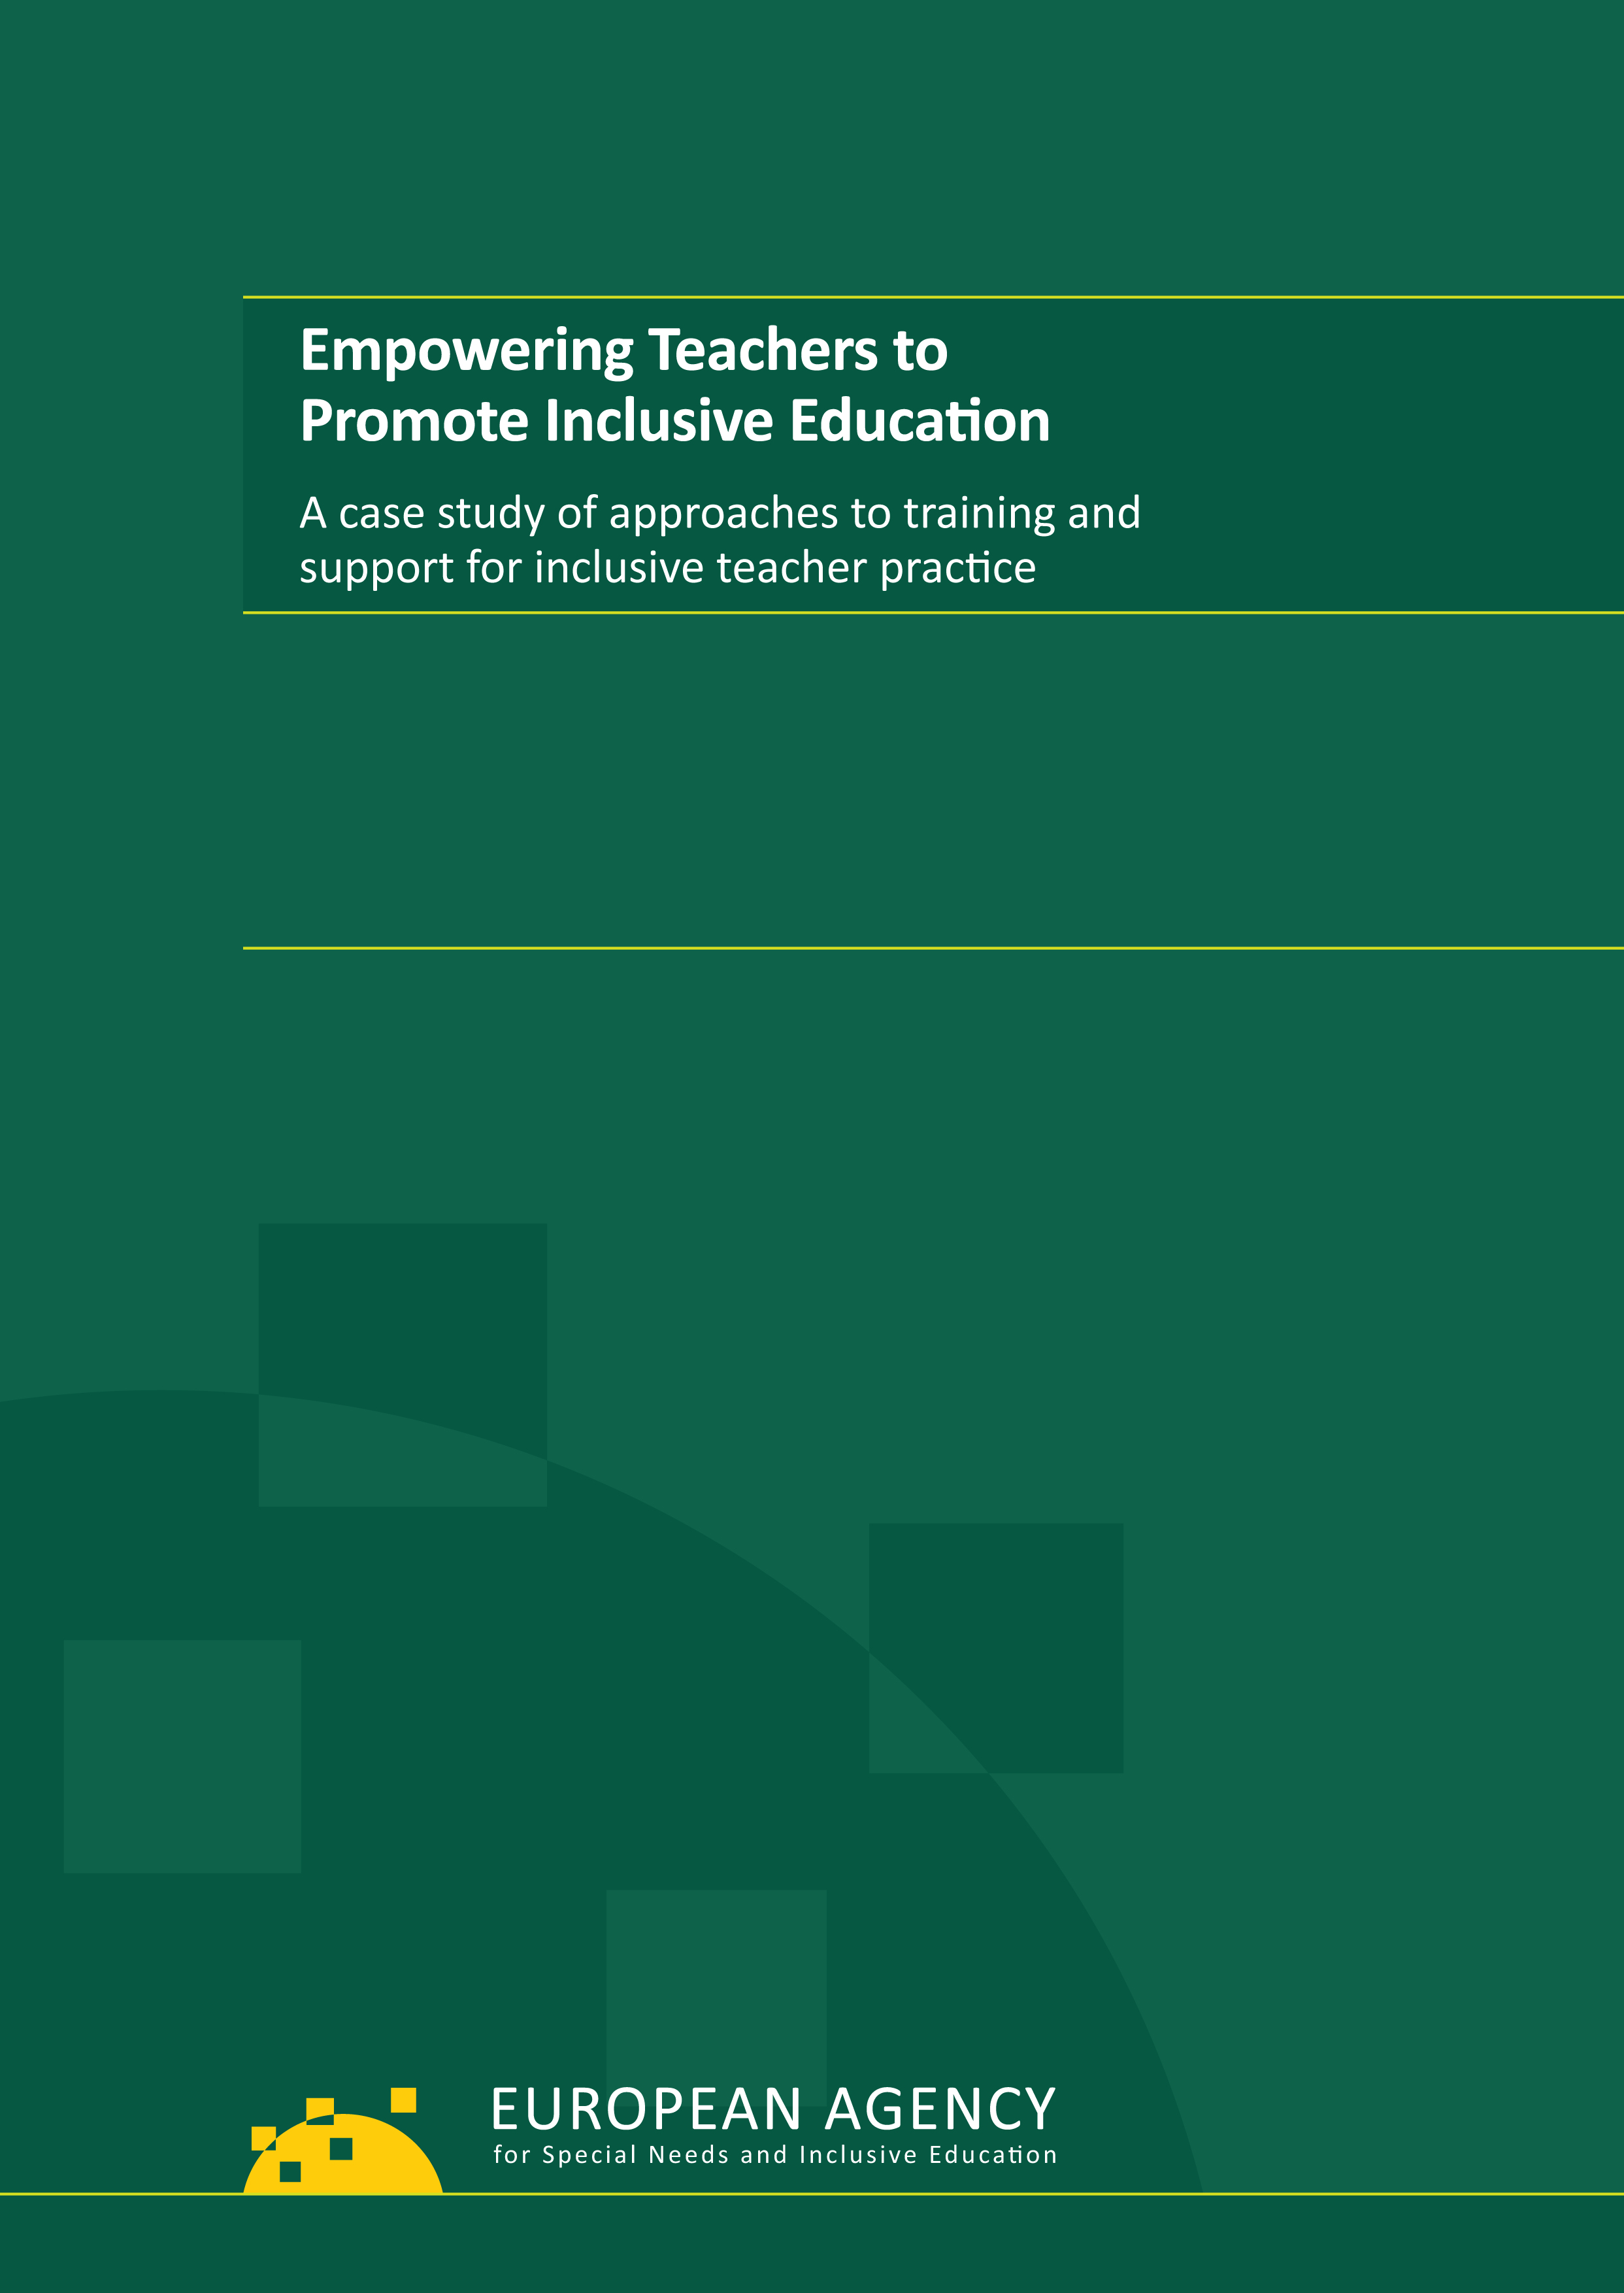 Empowering Teachers to Promote Inclusive Education